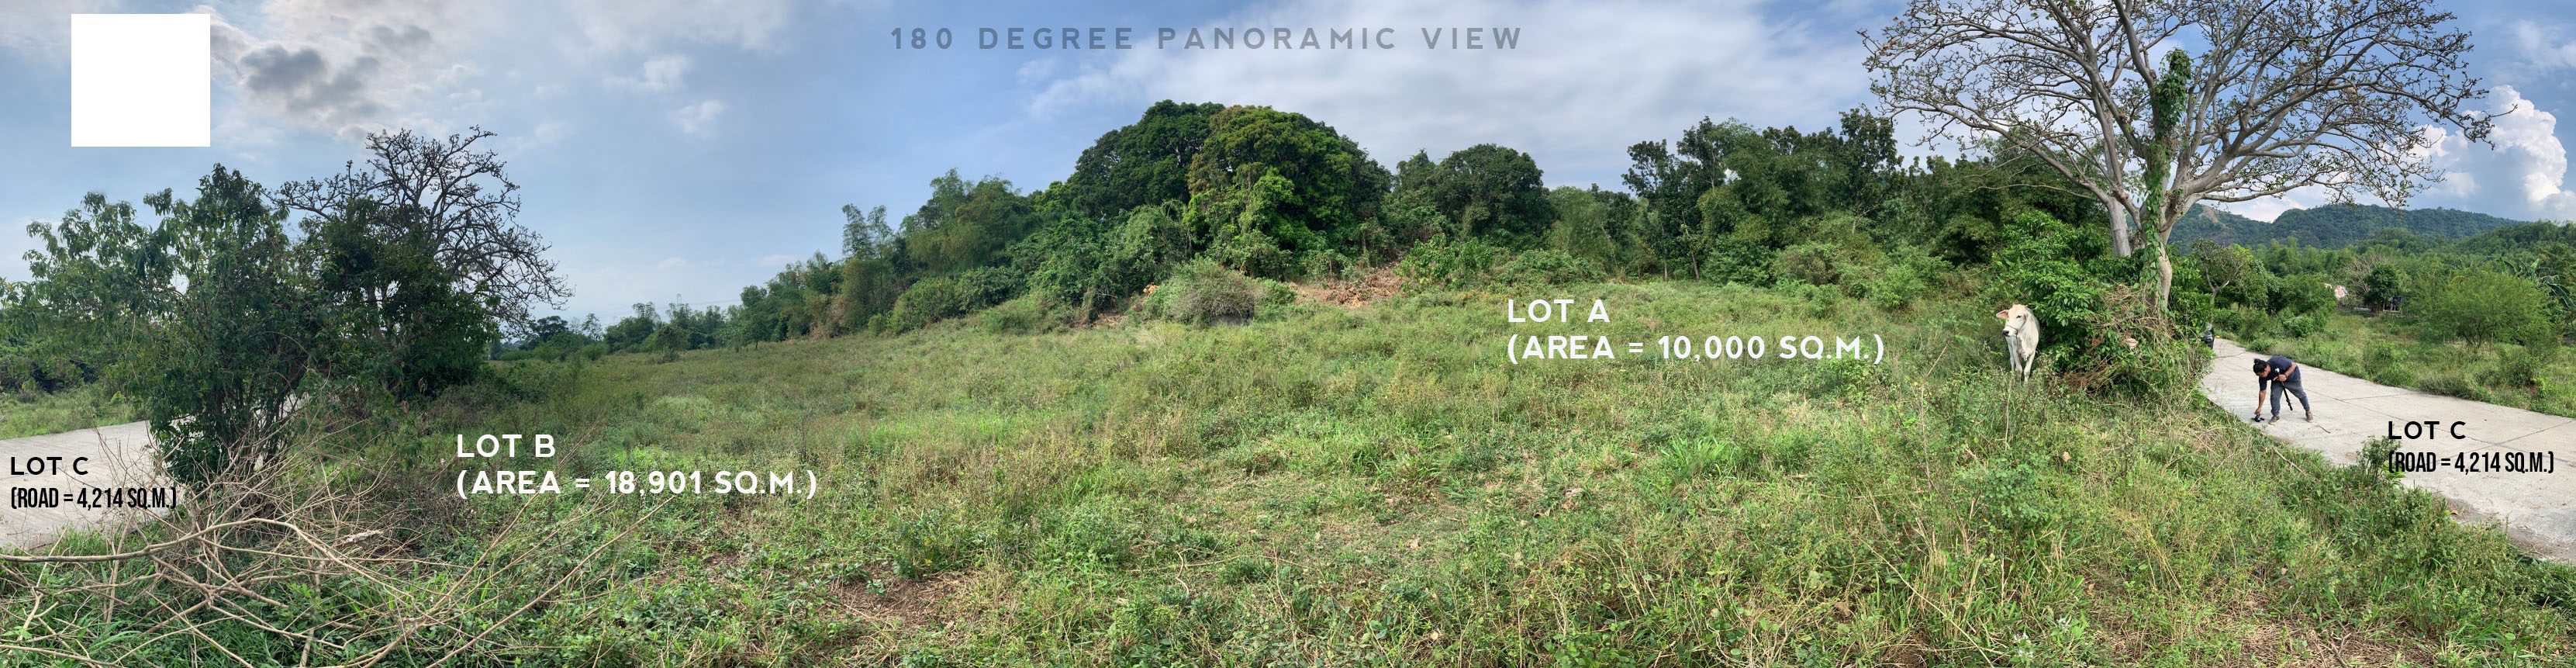 Agricultural land for sale in Pililla, Rizal